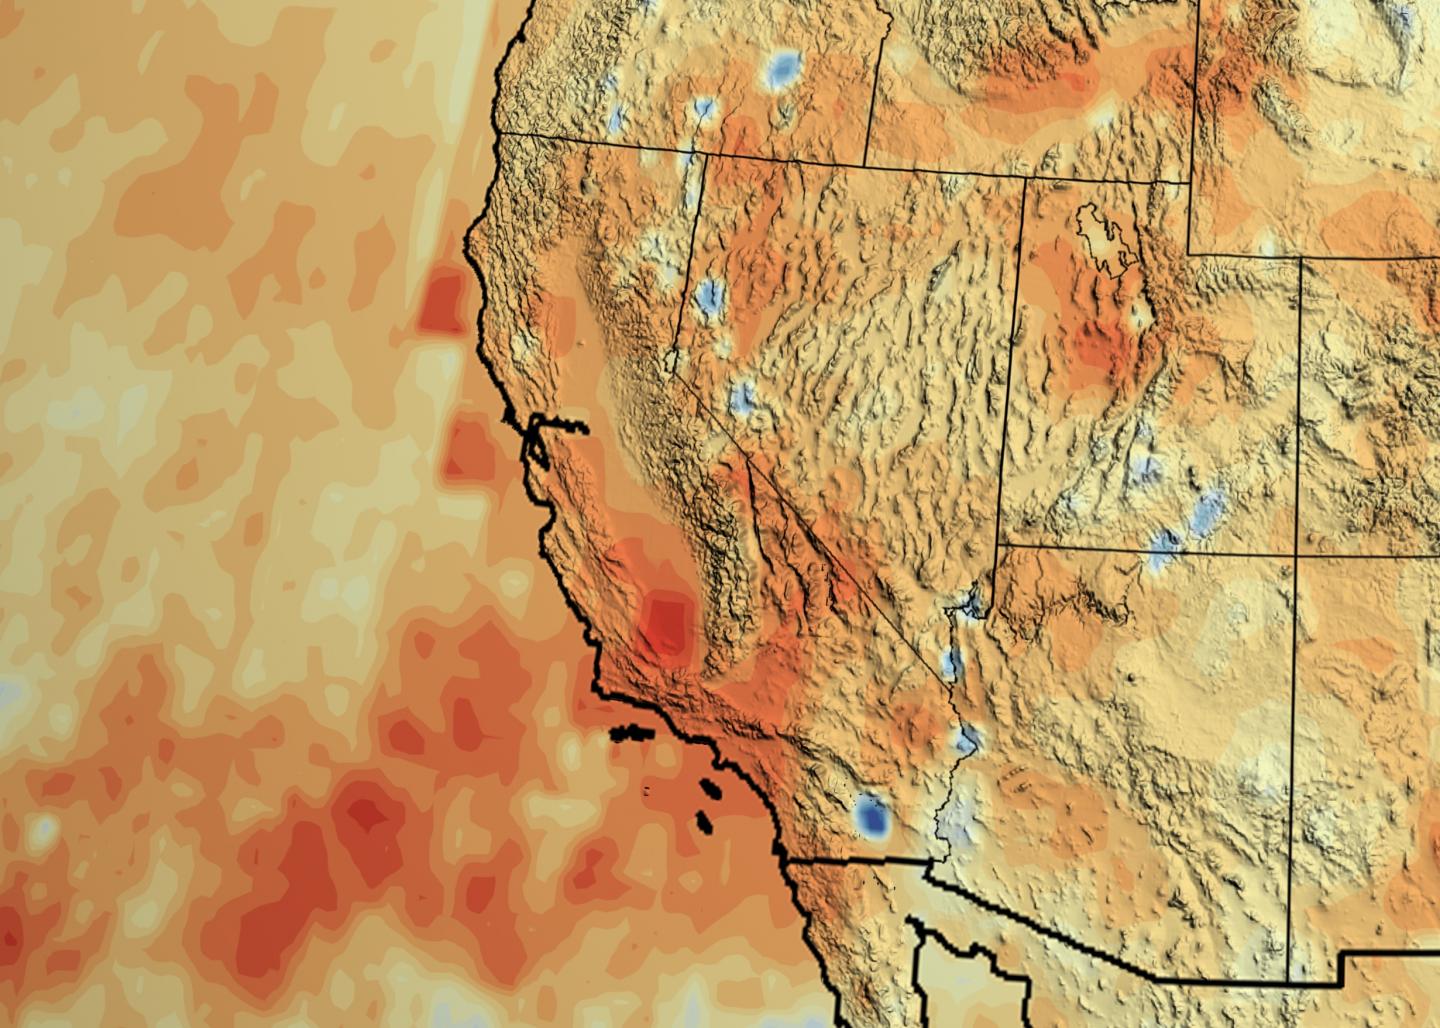 California's Accumulated Precipitation 'Deficit' From 2012 to 2014